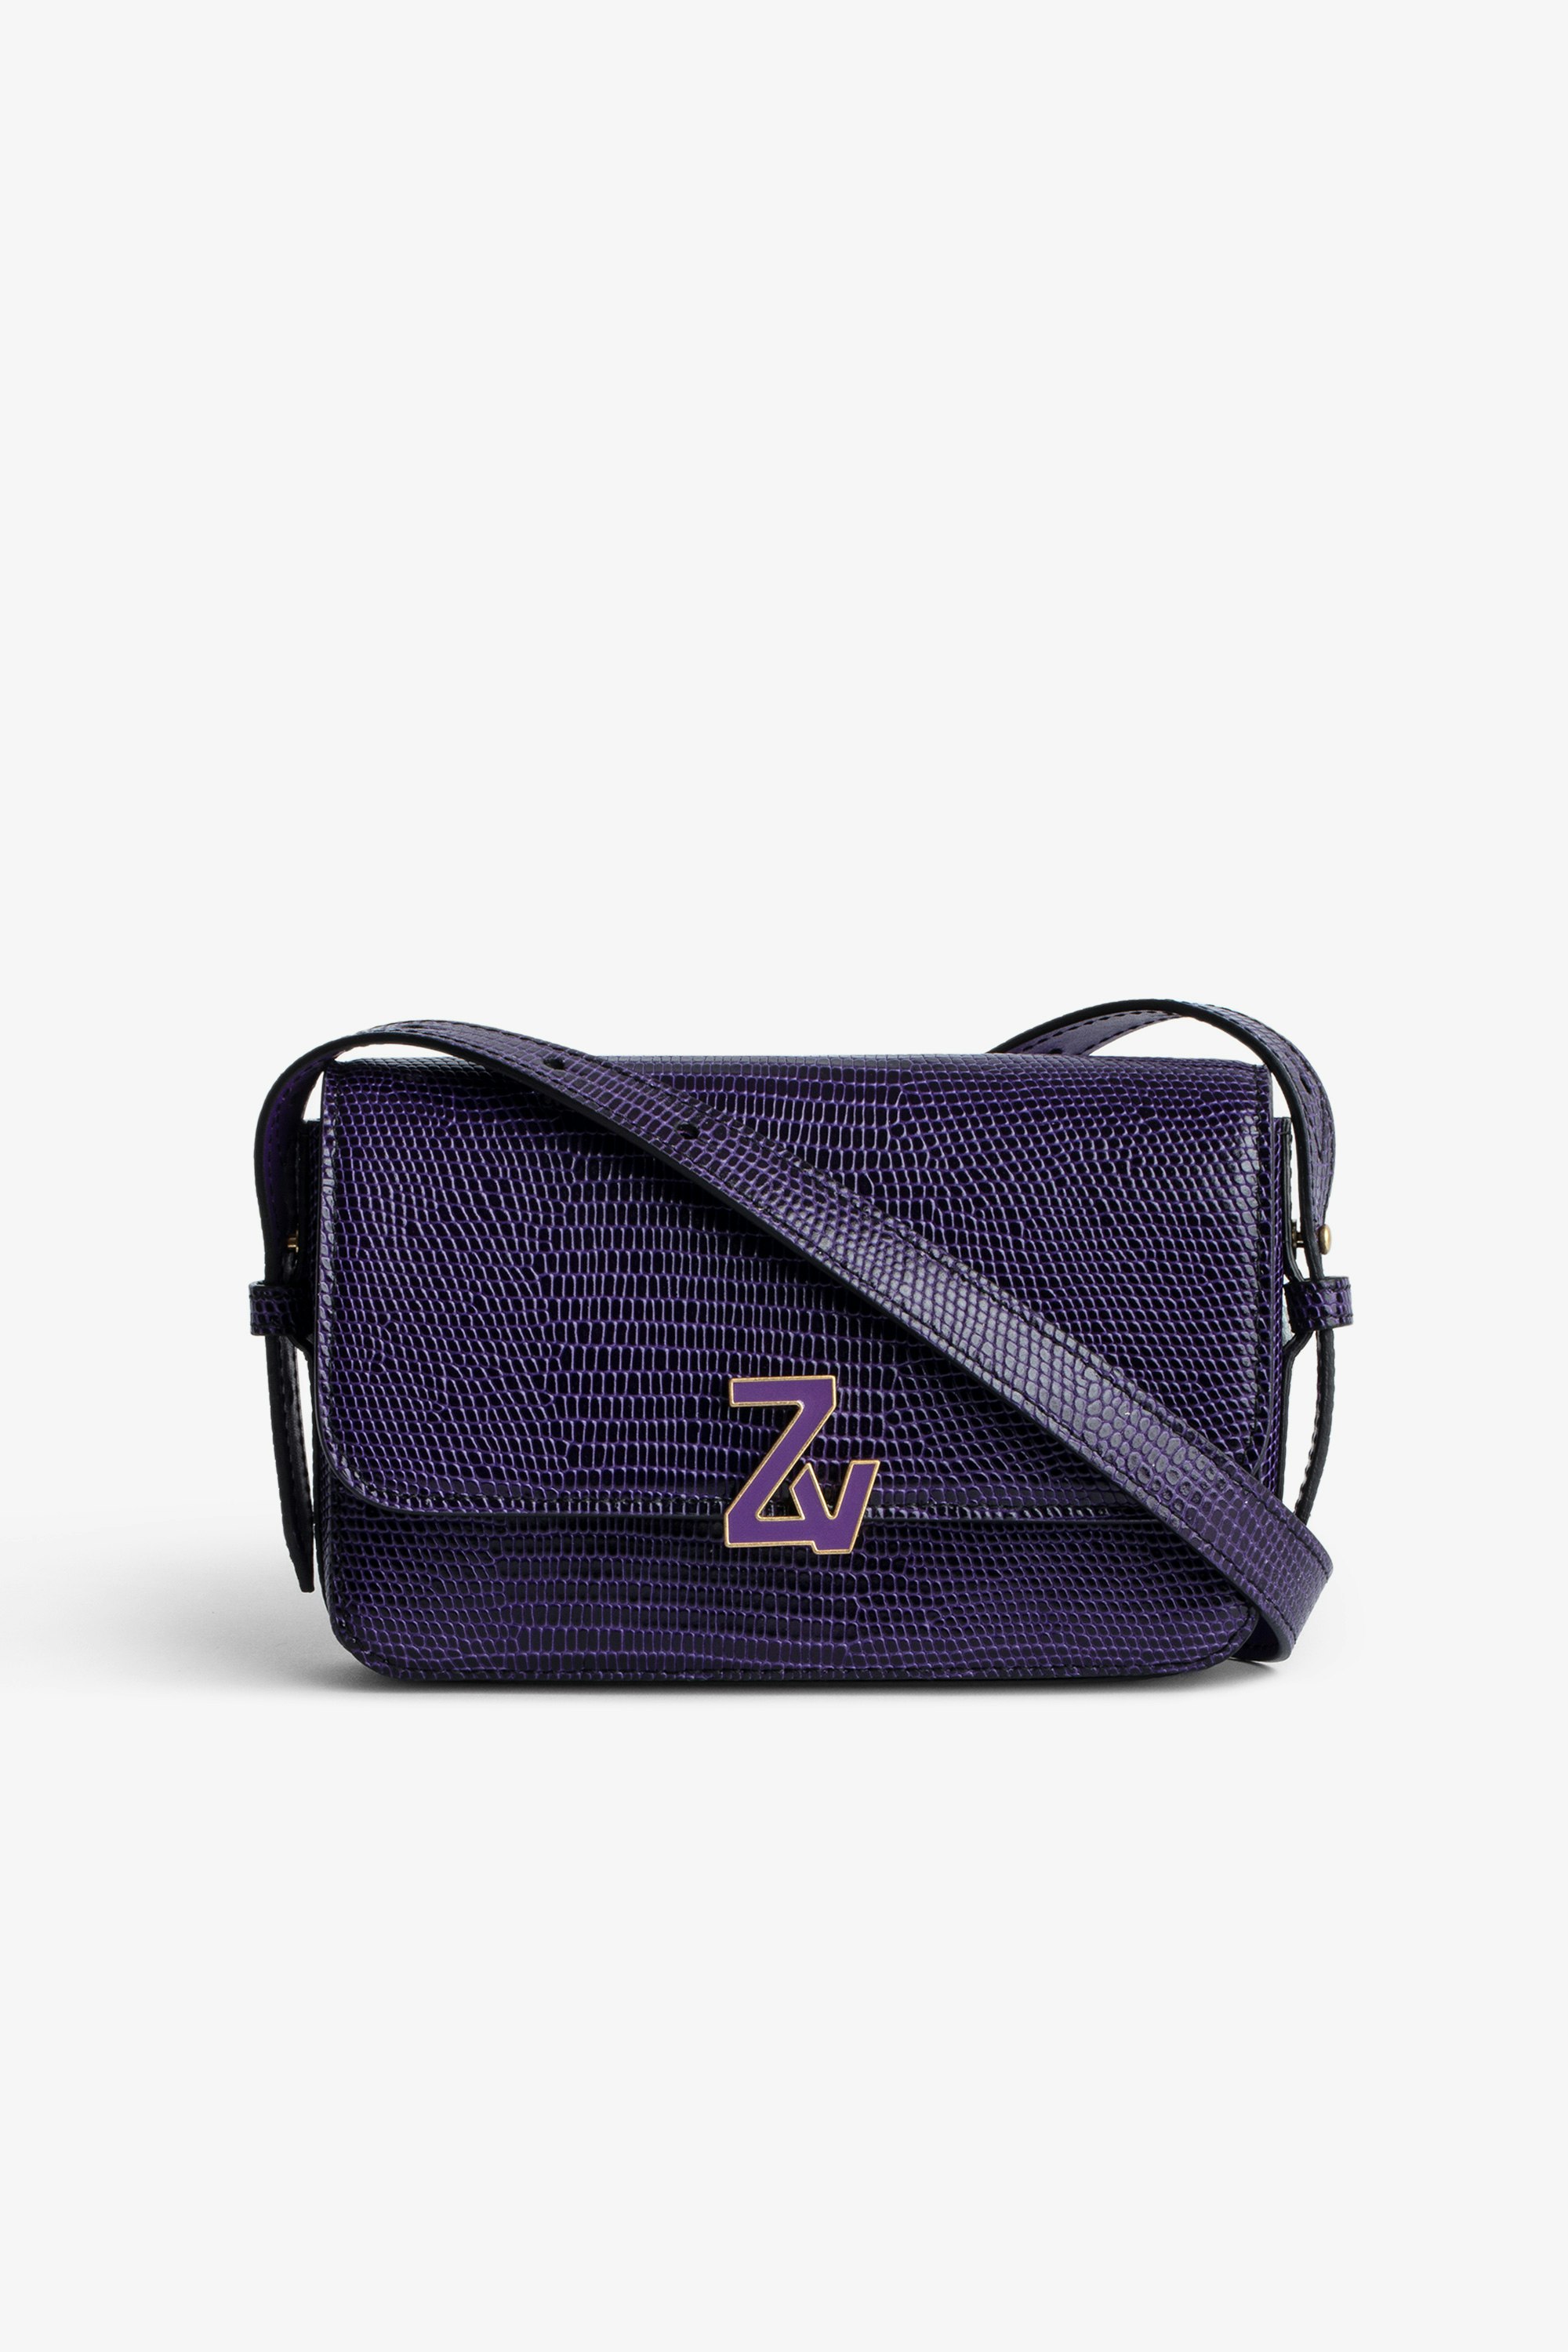 Le Mini ZV Initiale Bag Women’s Le Mini ZV Initiale bag in violet iguana-effect embossed leather with flap, clasp, and shoulder strap